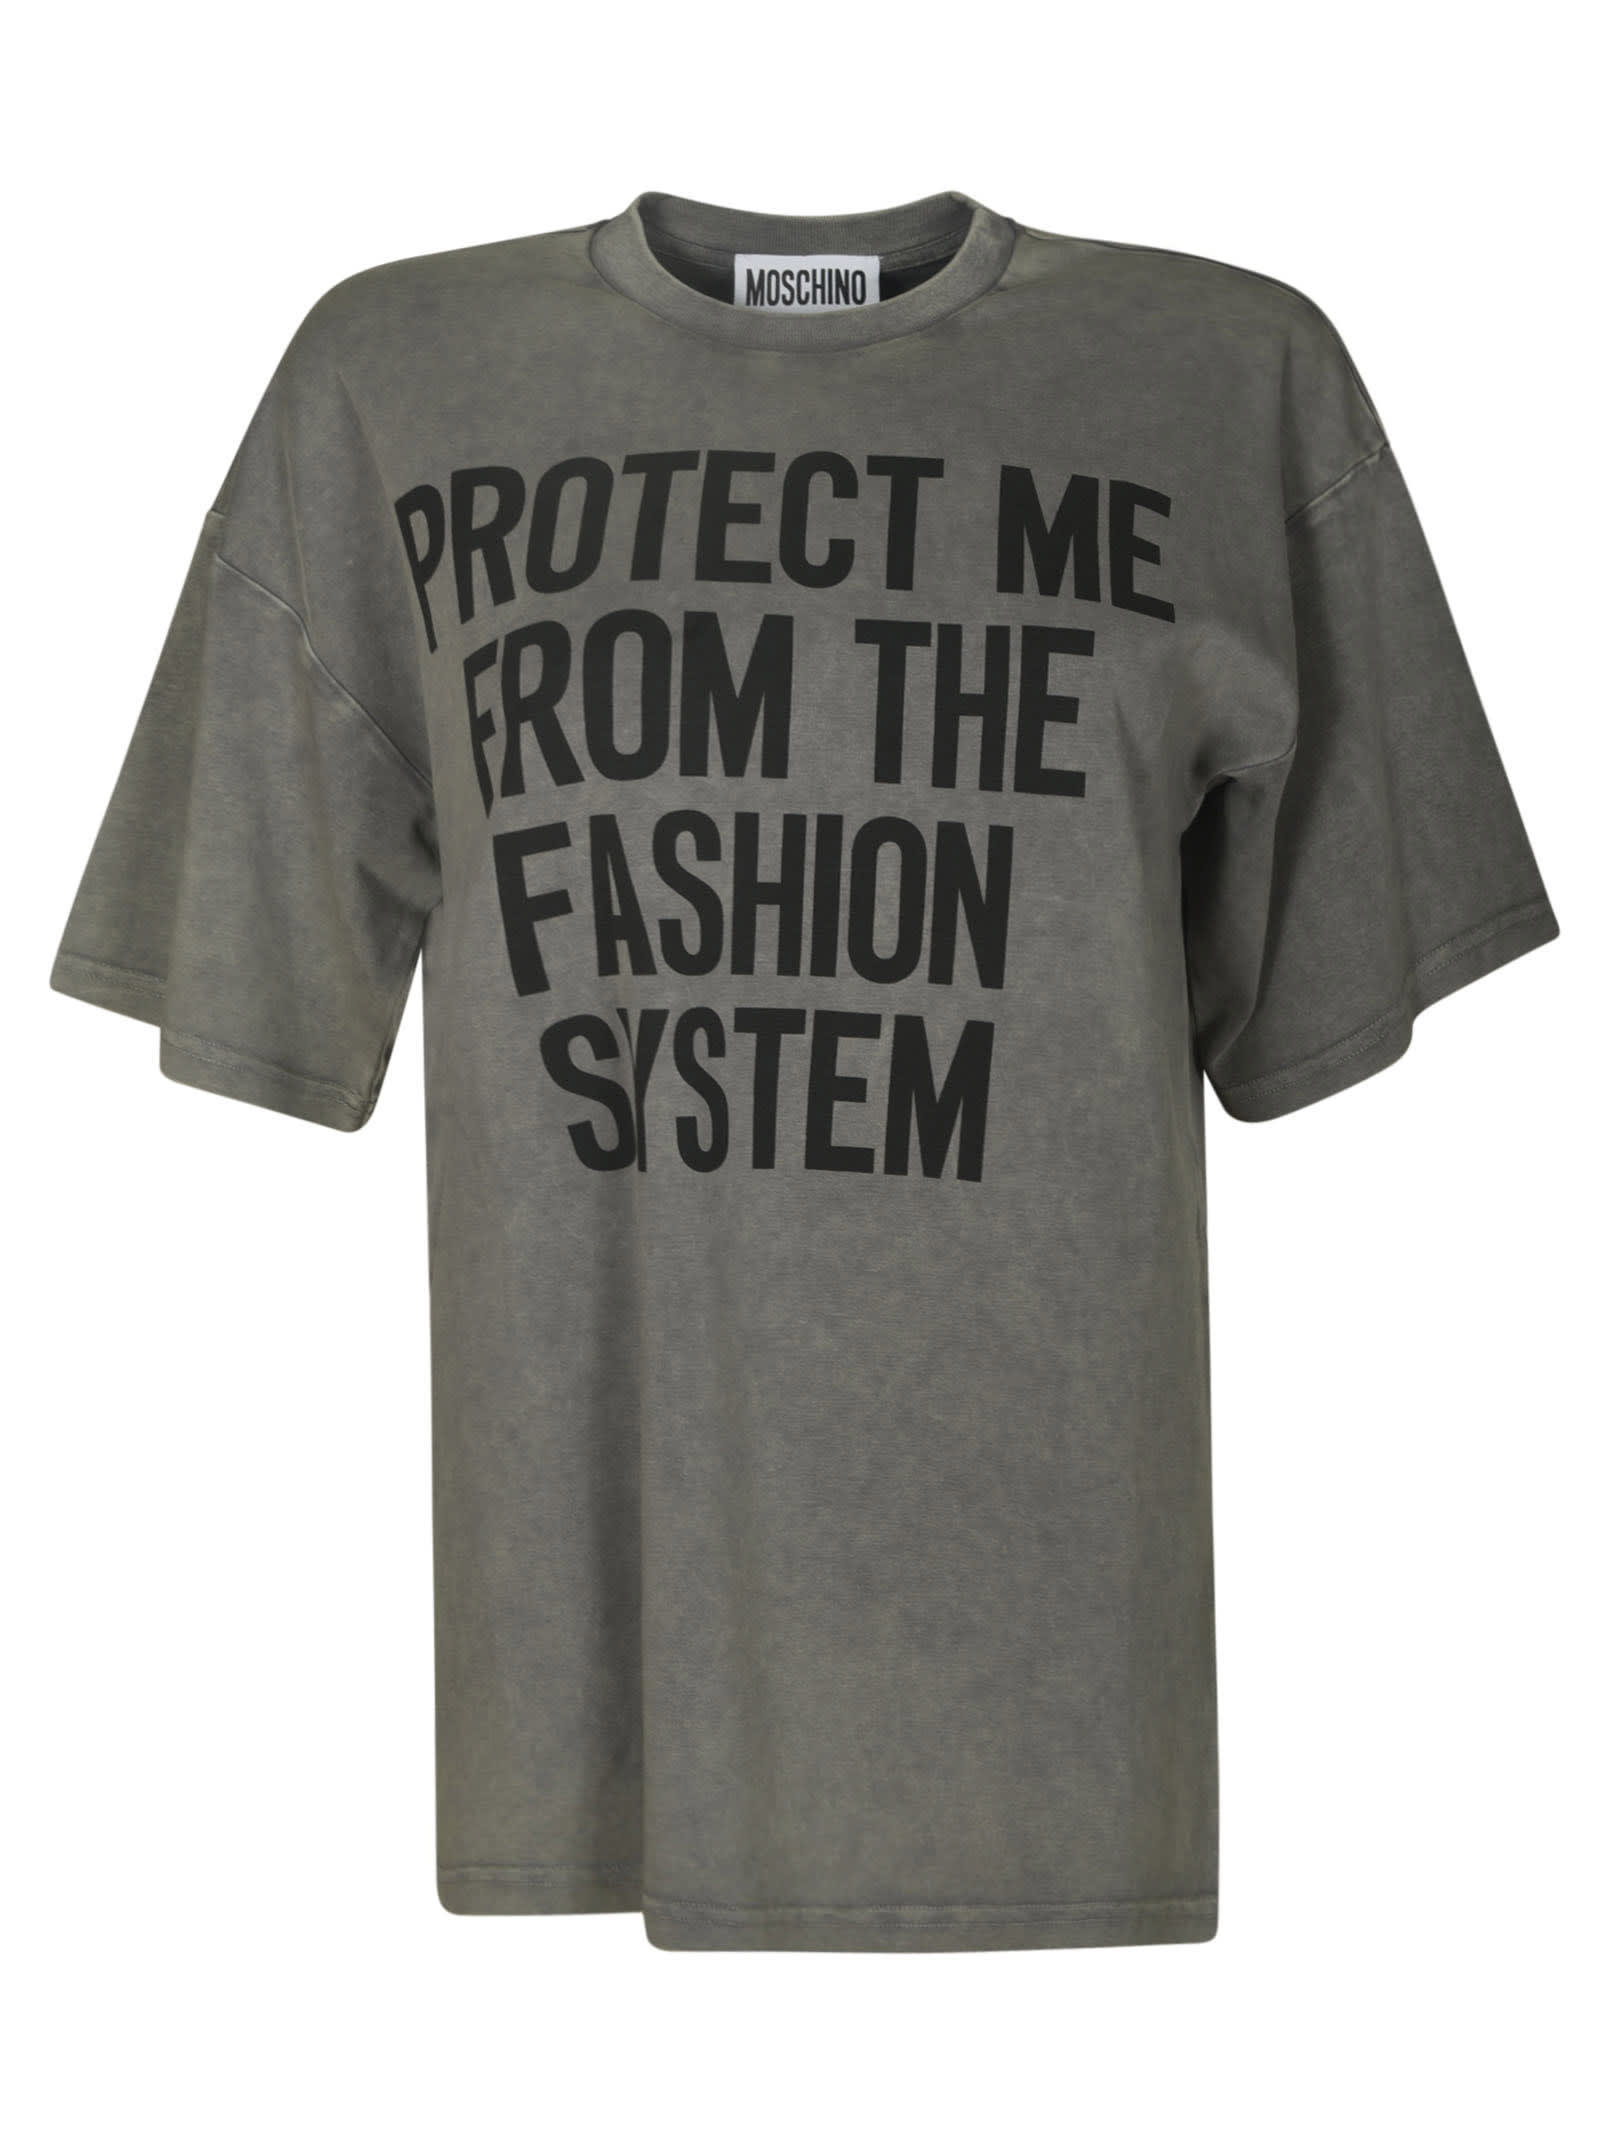 Moschino Protect Me T-shirt In 1888